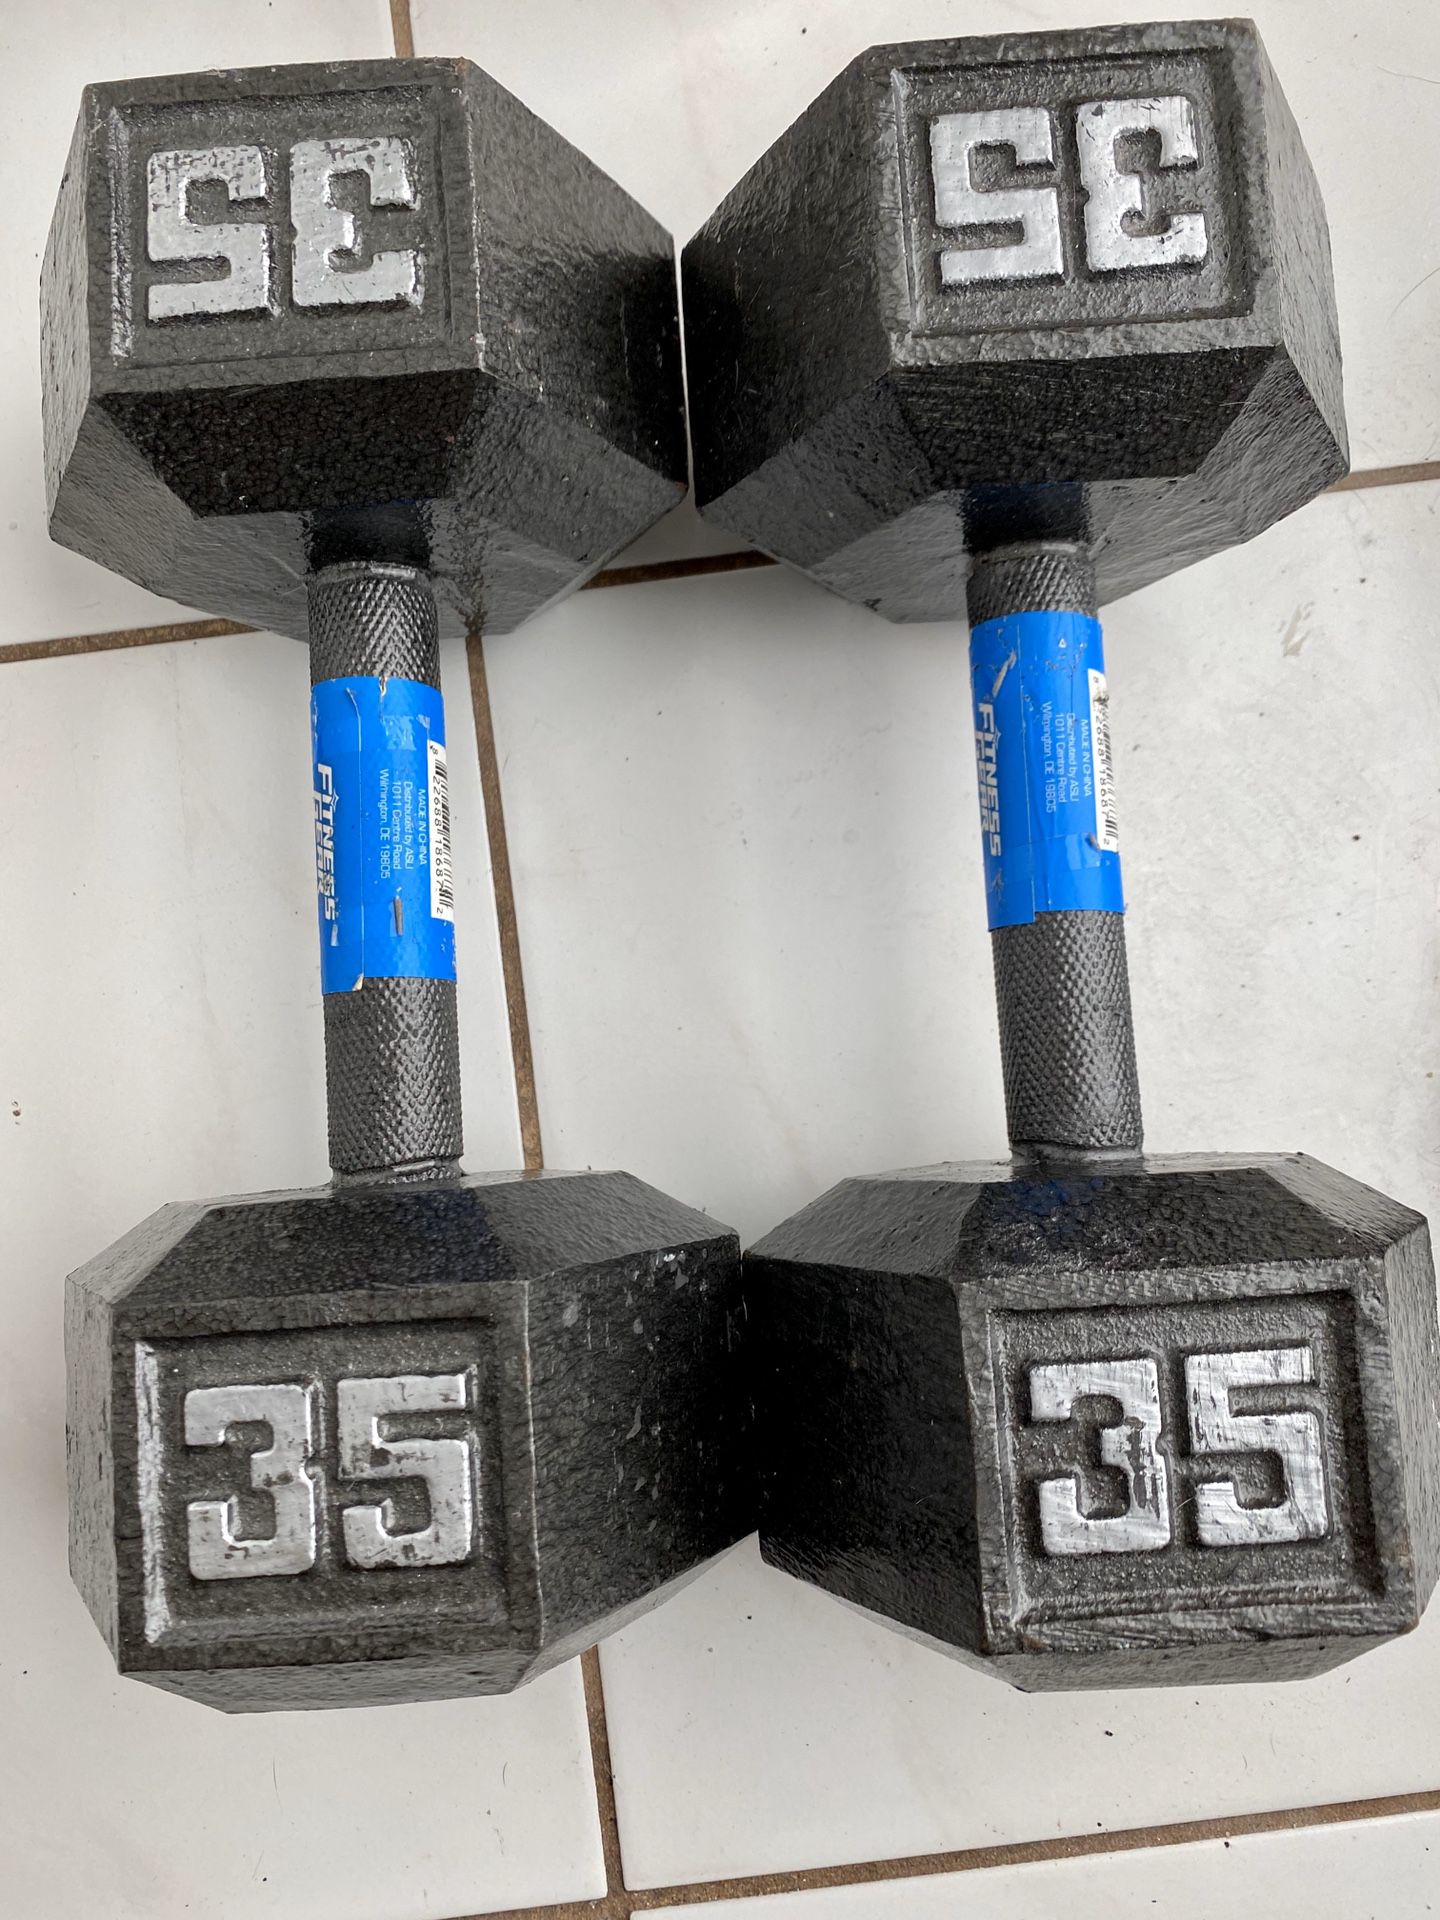 35 lb Dumbbell Set! 35 Pounds Each, 70 lbs total. $45 buys both!